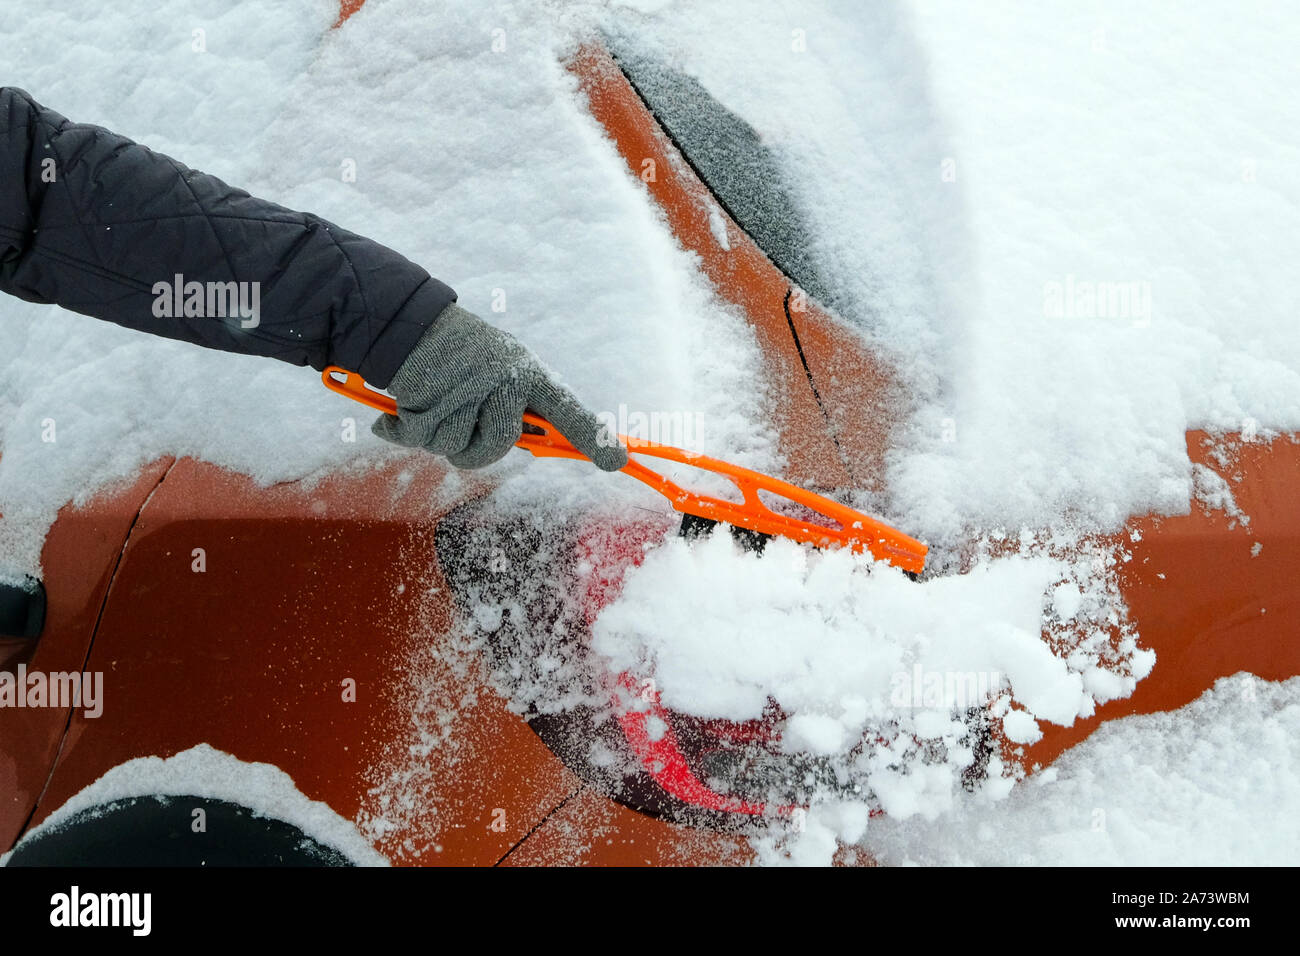 Man clears orange car from snow on a cold winter day after snowfall. Brush in mans hand. Lot of snow on car. Stock Photo